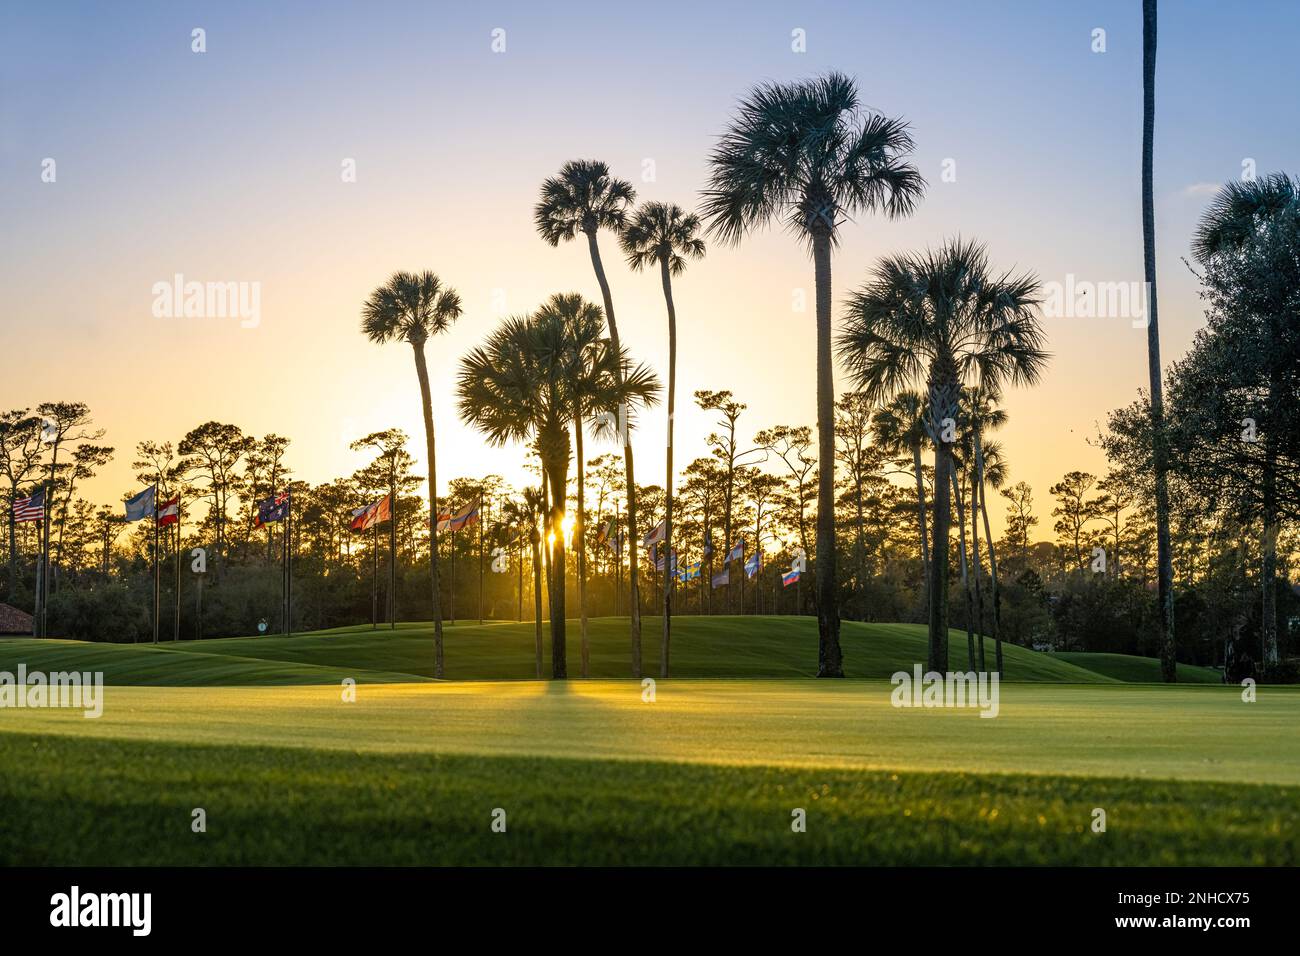 Sunset view of palm trees and international flags along THE PLAYERS Stadium Course at TPC Sawgrass, home of THE PLAYERS Championship in North Florida. Stock Photo